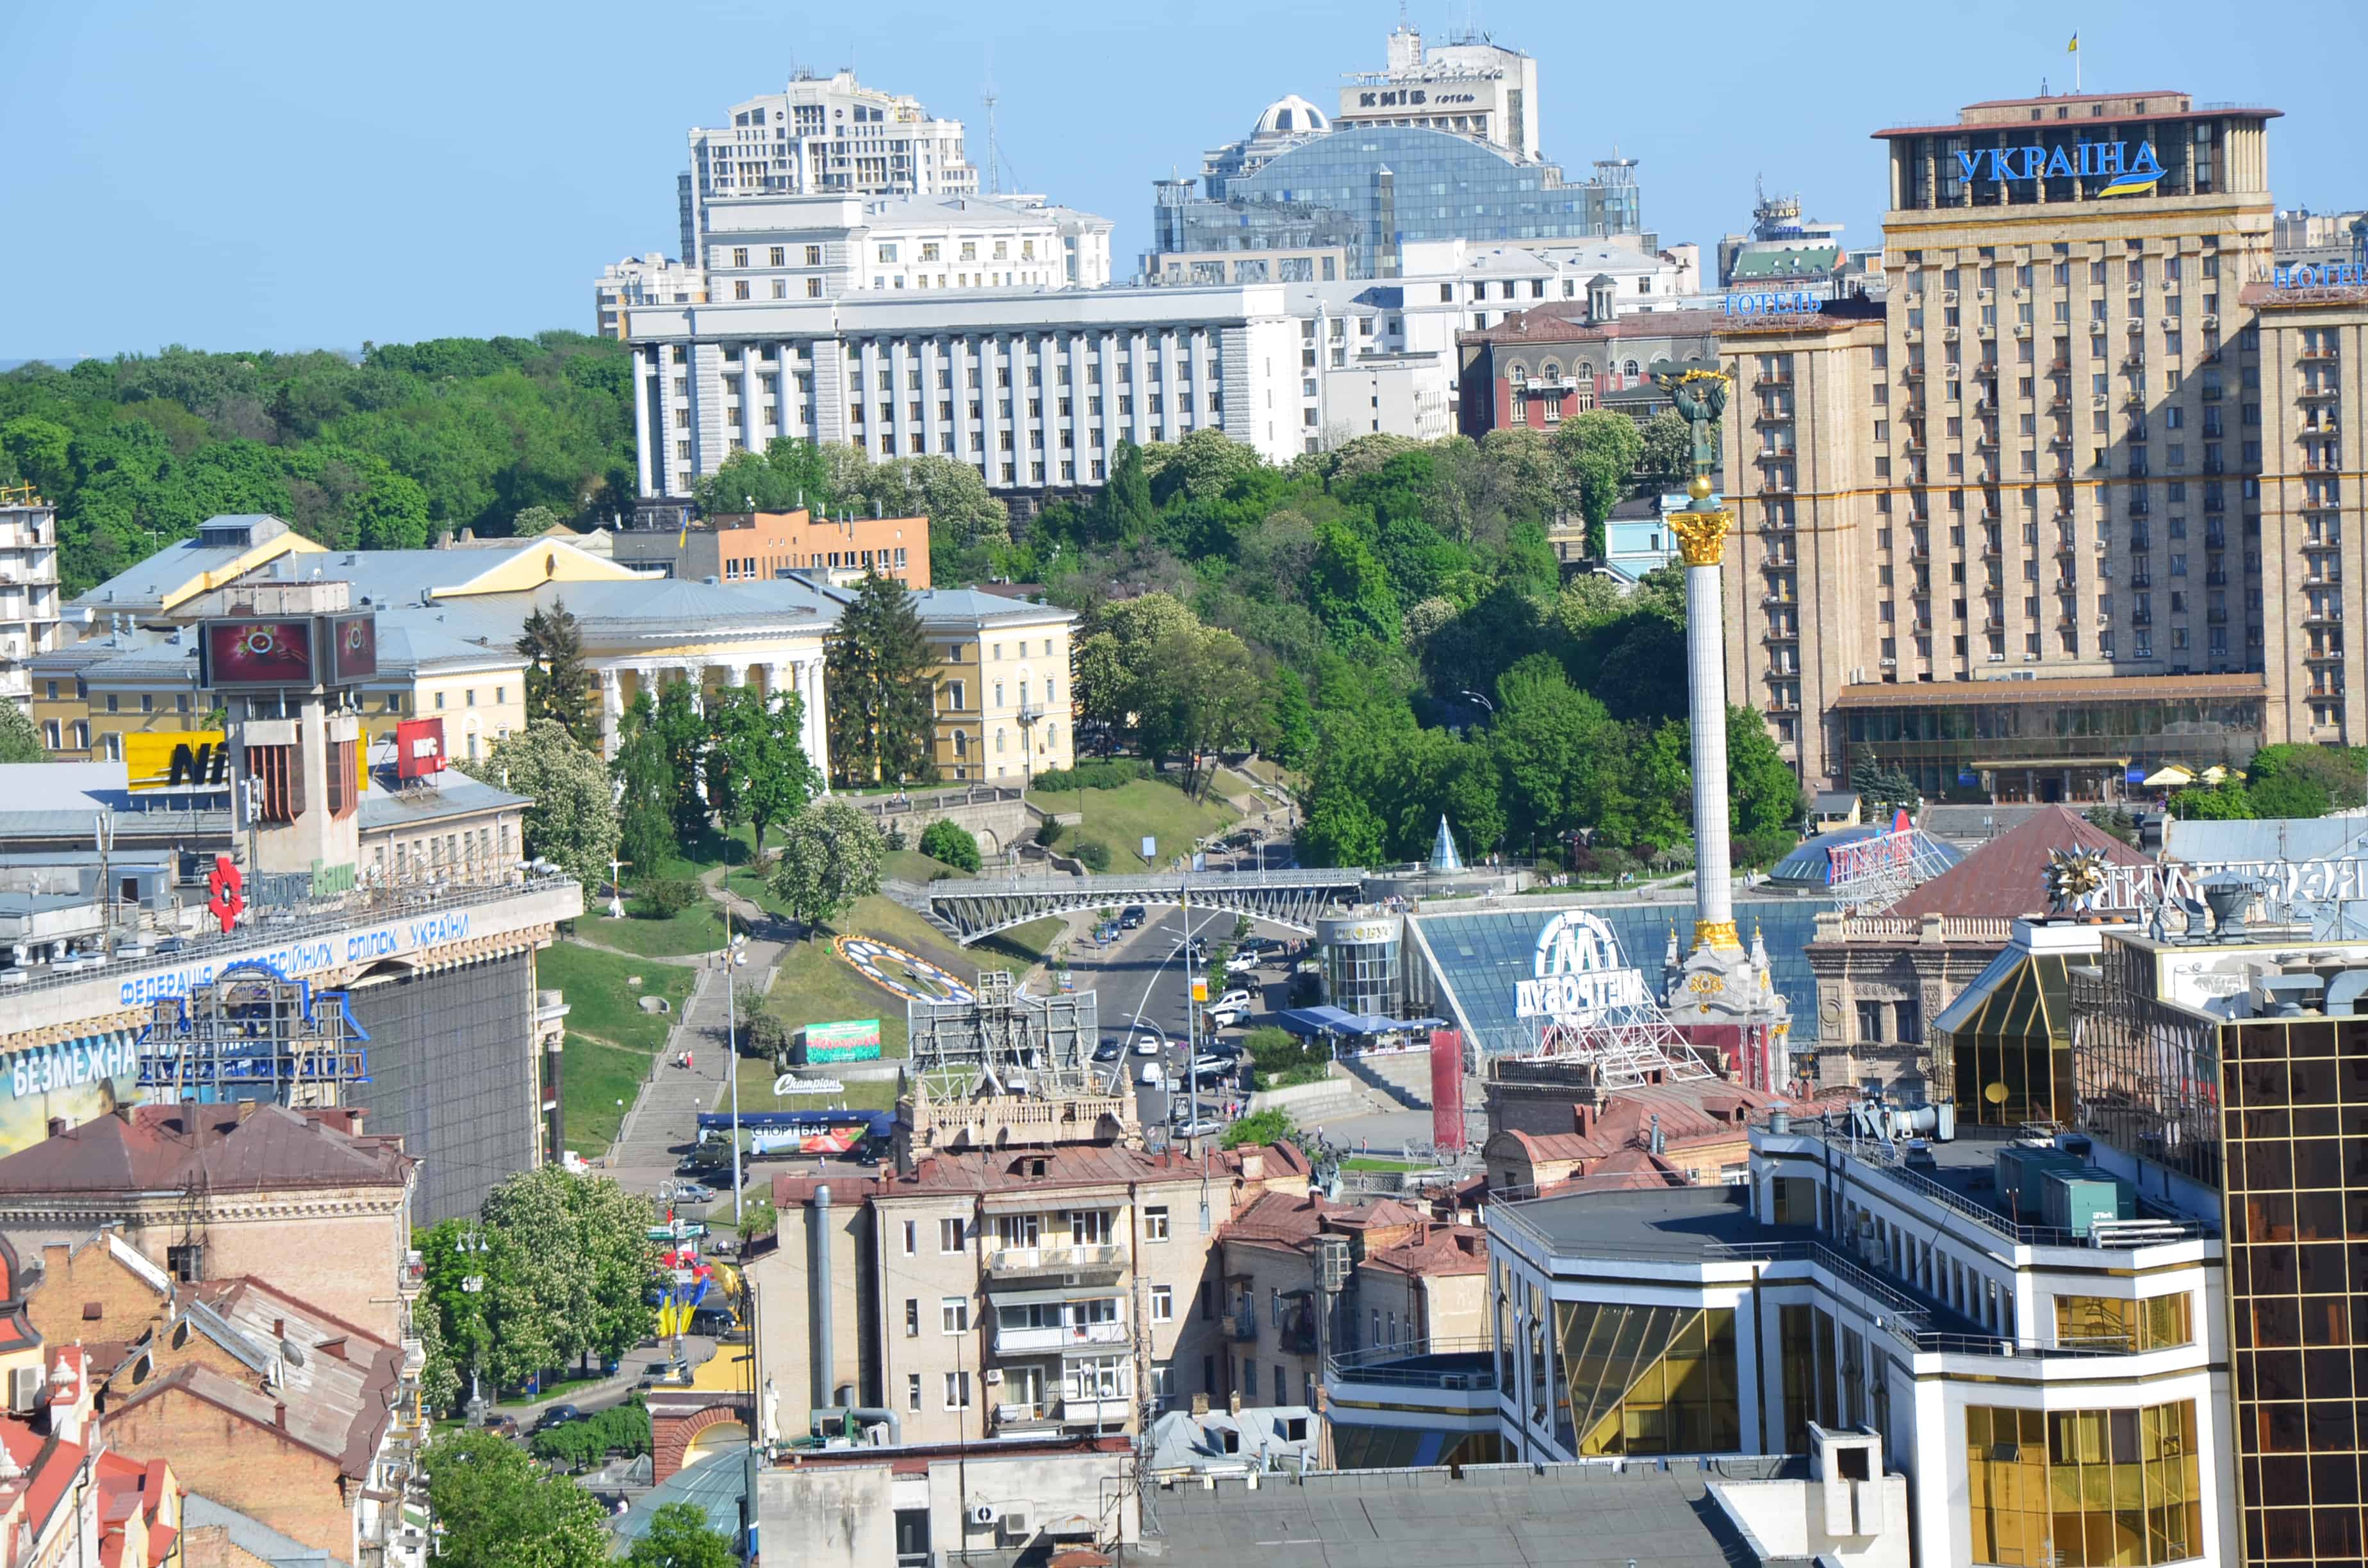 View of Maidan Nezalezhnosti from the bell tower at Saint Sophia Cathedral complex in Kyiv, Ukraine